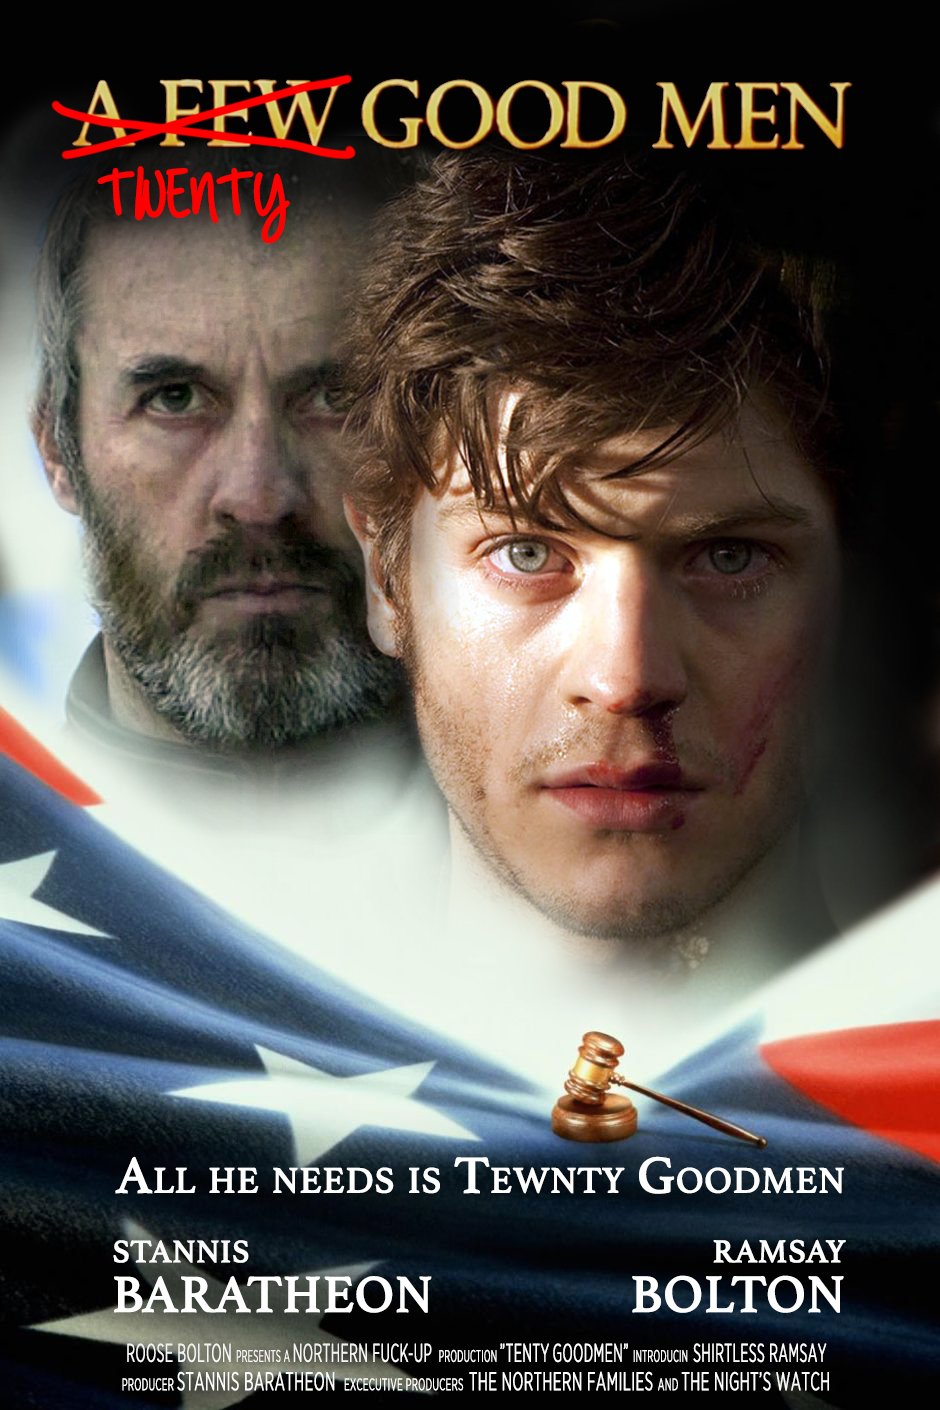 18 Hilarious Game Of Thrones Spin-Off Movies